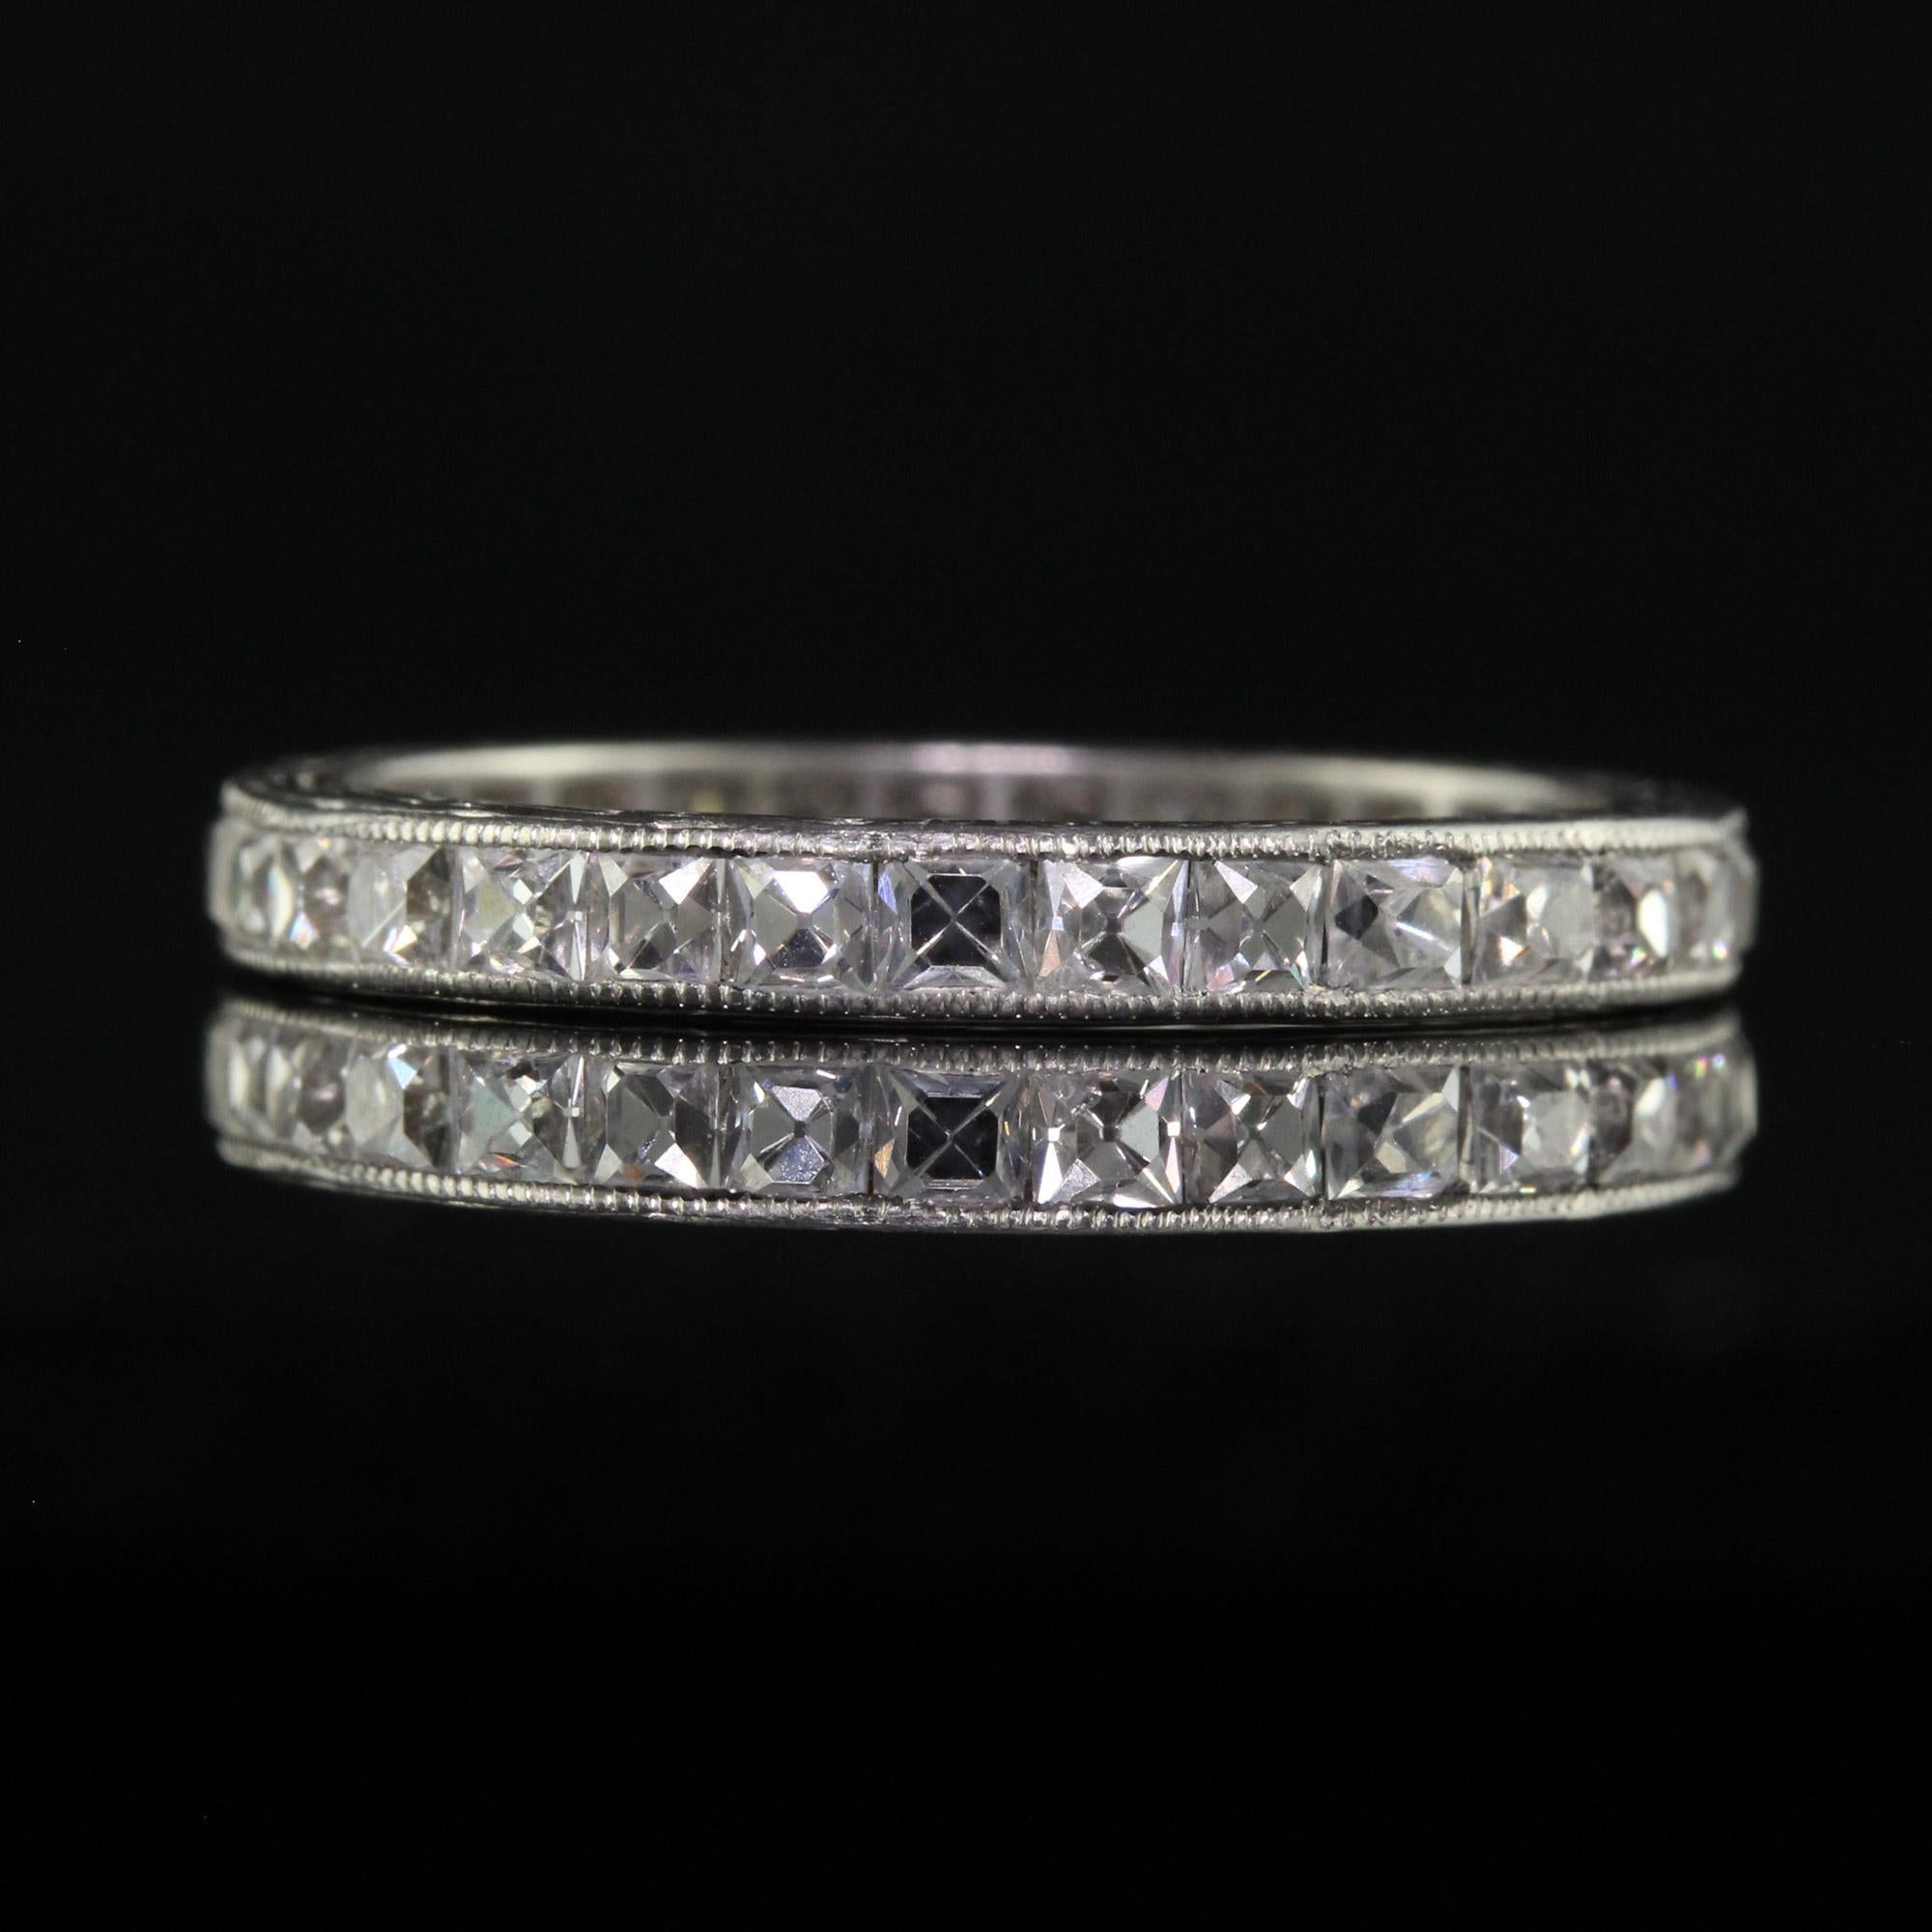 Antique Edwardian Platinum French Cut Diamond Engraved Eternity Ring - Size 7 For Sale 2